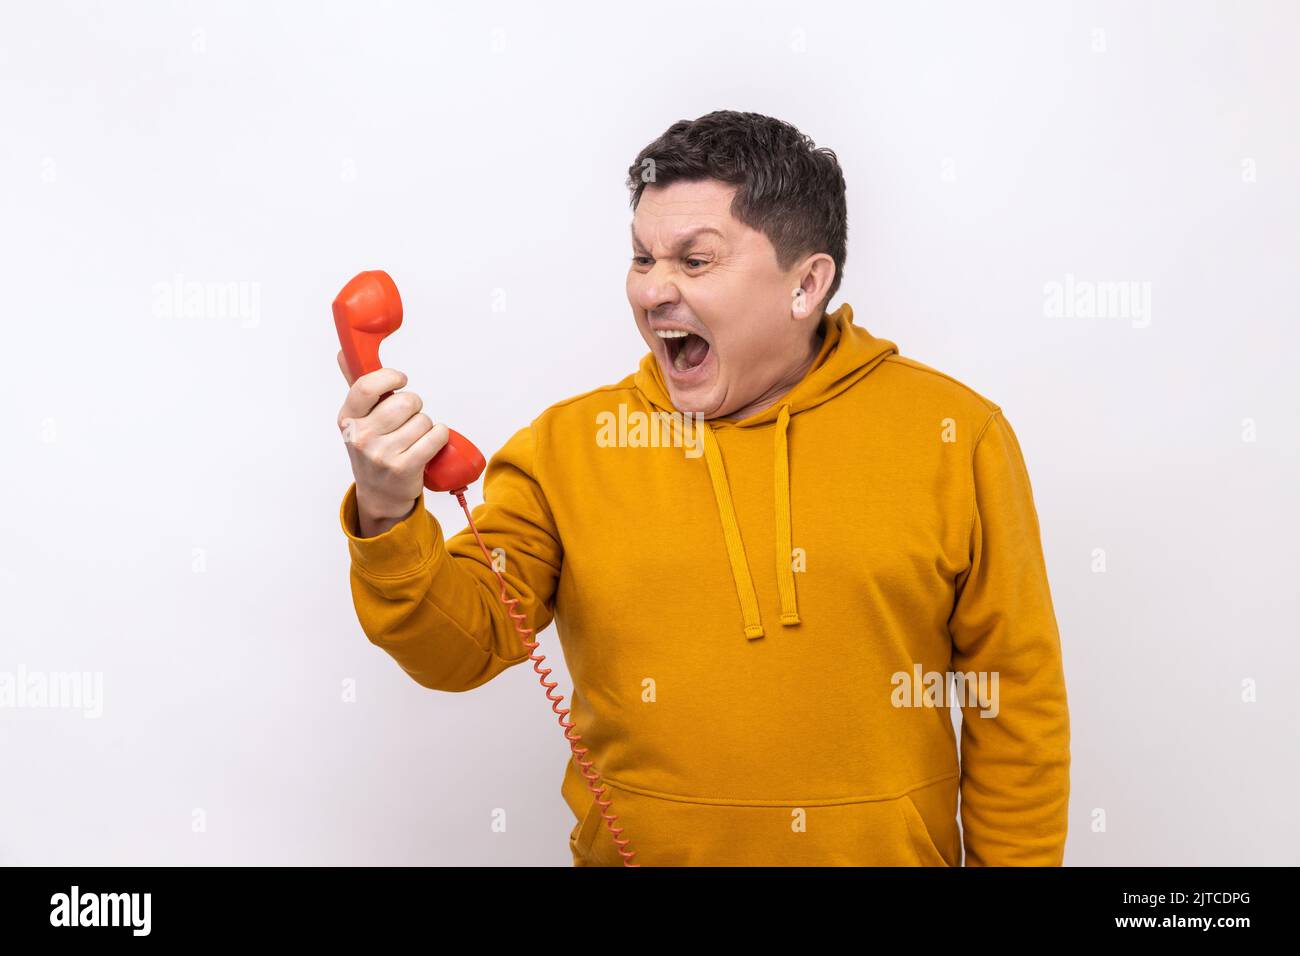 Portrait of nervous man screaming and yelling talking retro landline phone, complaining on connection quality, wearing urban style hoodie. Indoor studio shot isolated on white background. Stock Photo